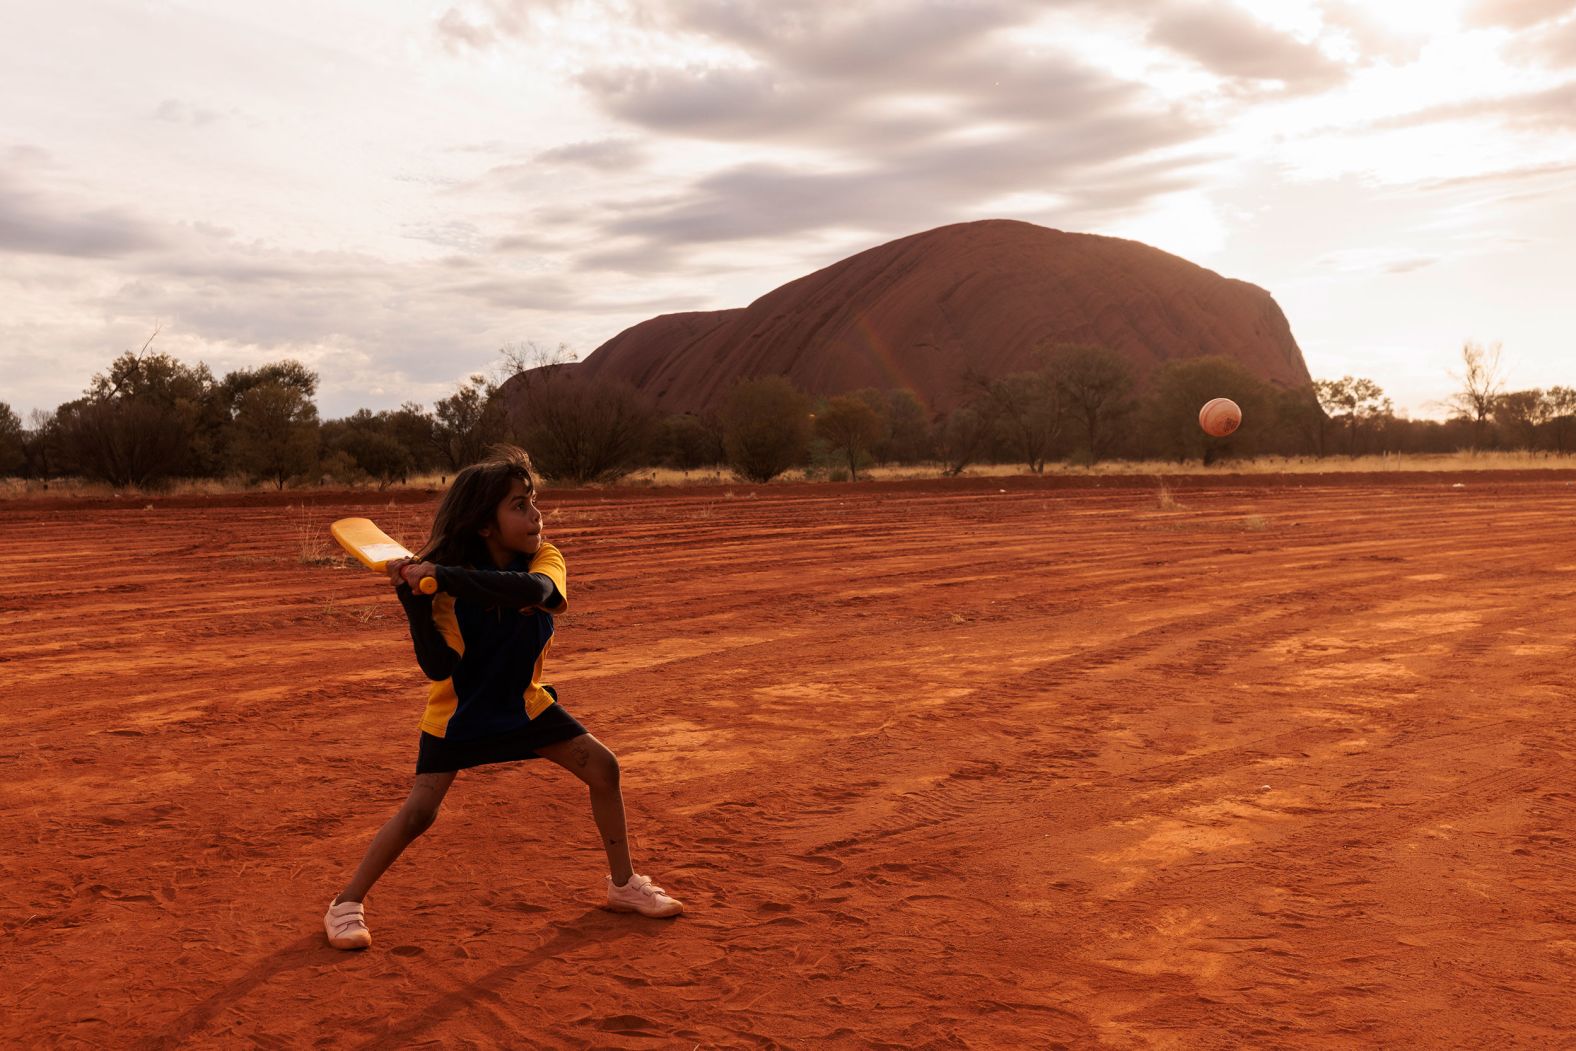 A child plays cricket in Mutitjulu, an Aboriginal community in Uluru, Australia, on Tuesday, August 9. The community was one of the stops on the ICC Men's T20 World Cup Trophy Tour.